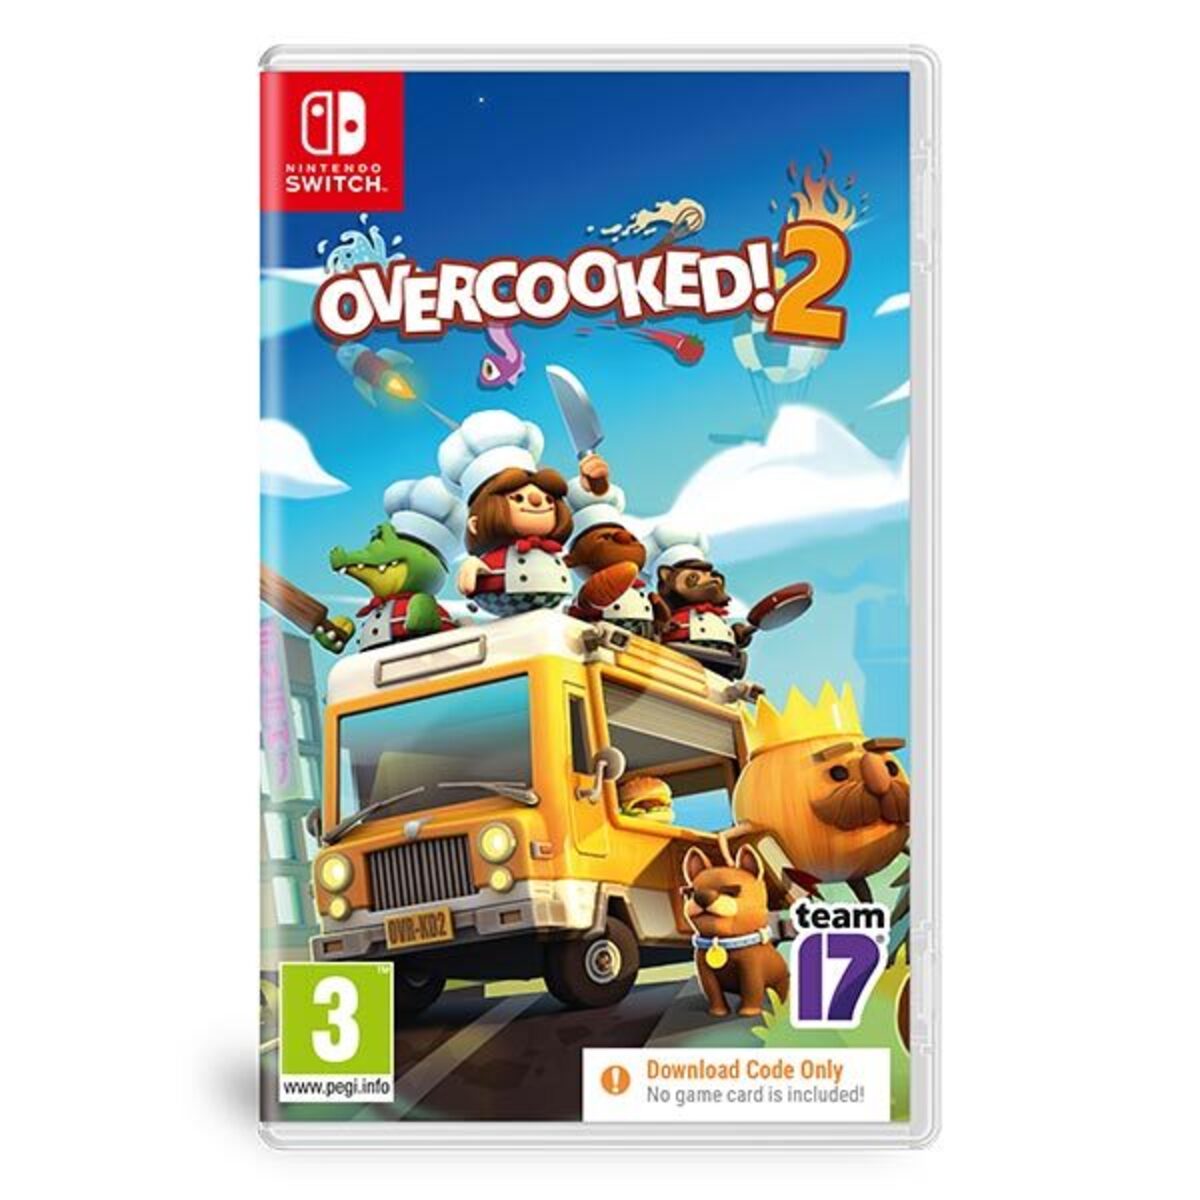 Photos - Game Fireshine  Overcooked! 2  - Switch(Download Code in Box)